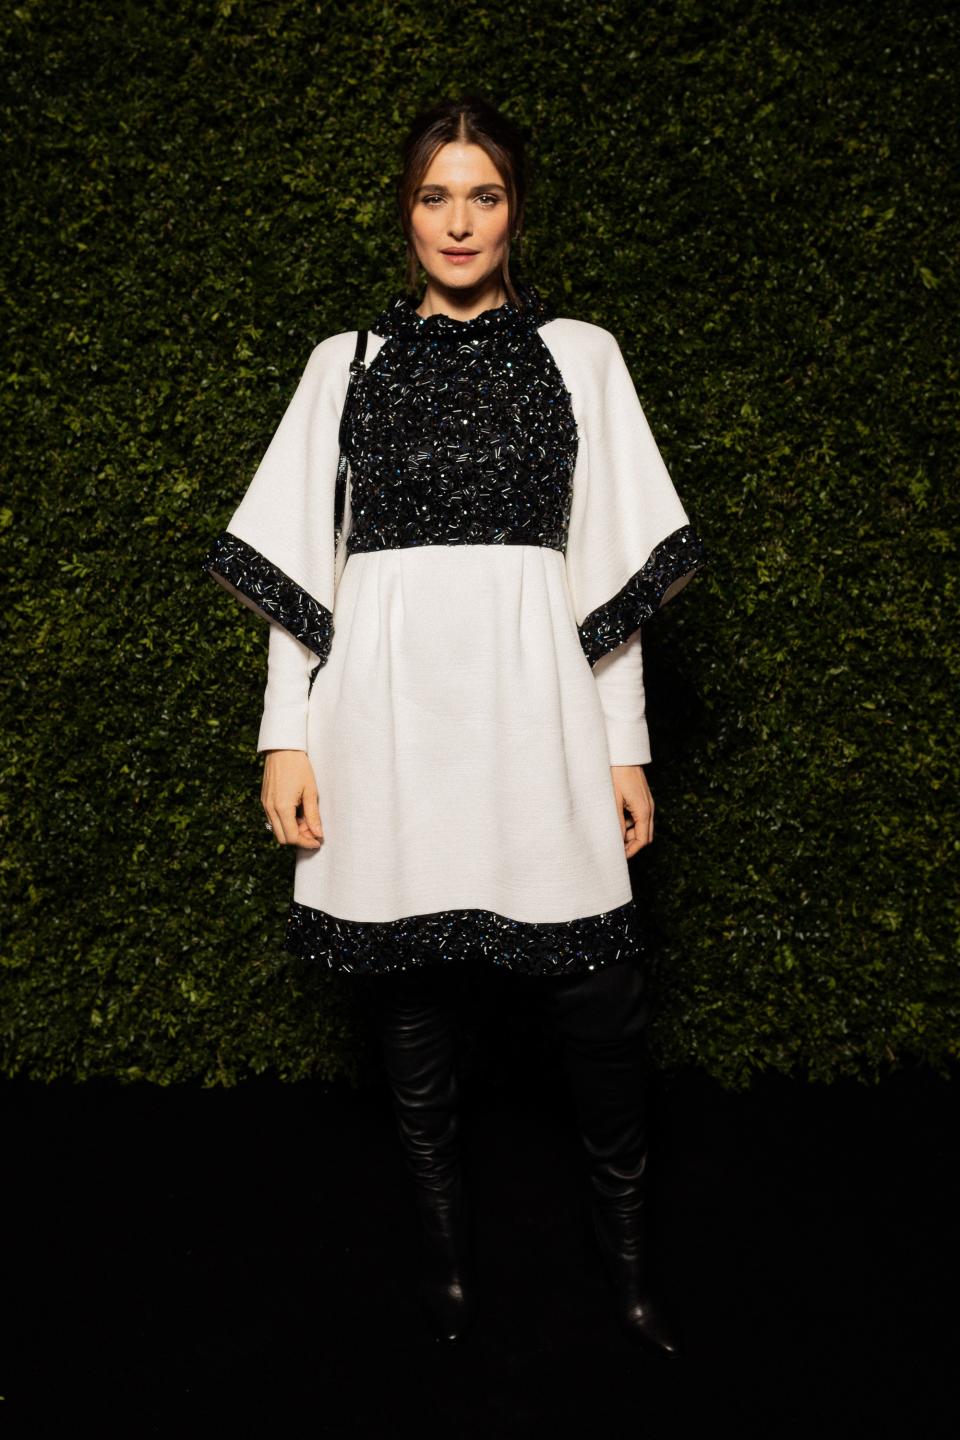 Rachel Weisz attends the Charles Finch & Chanel pre-Bafta dinner at Loulou’s